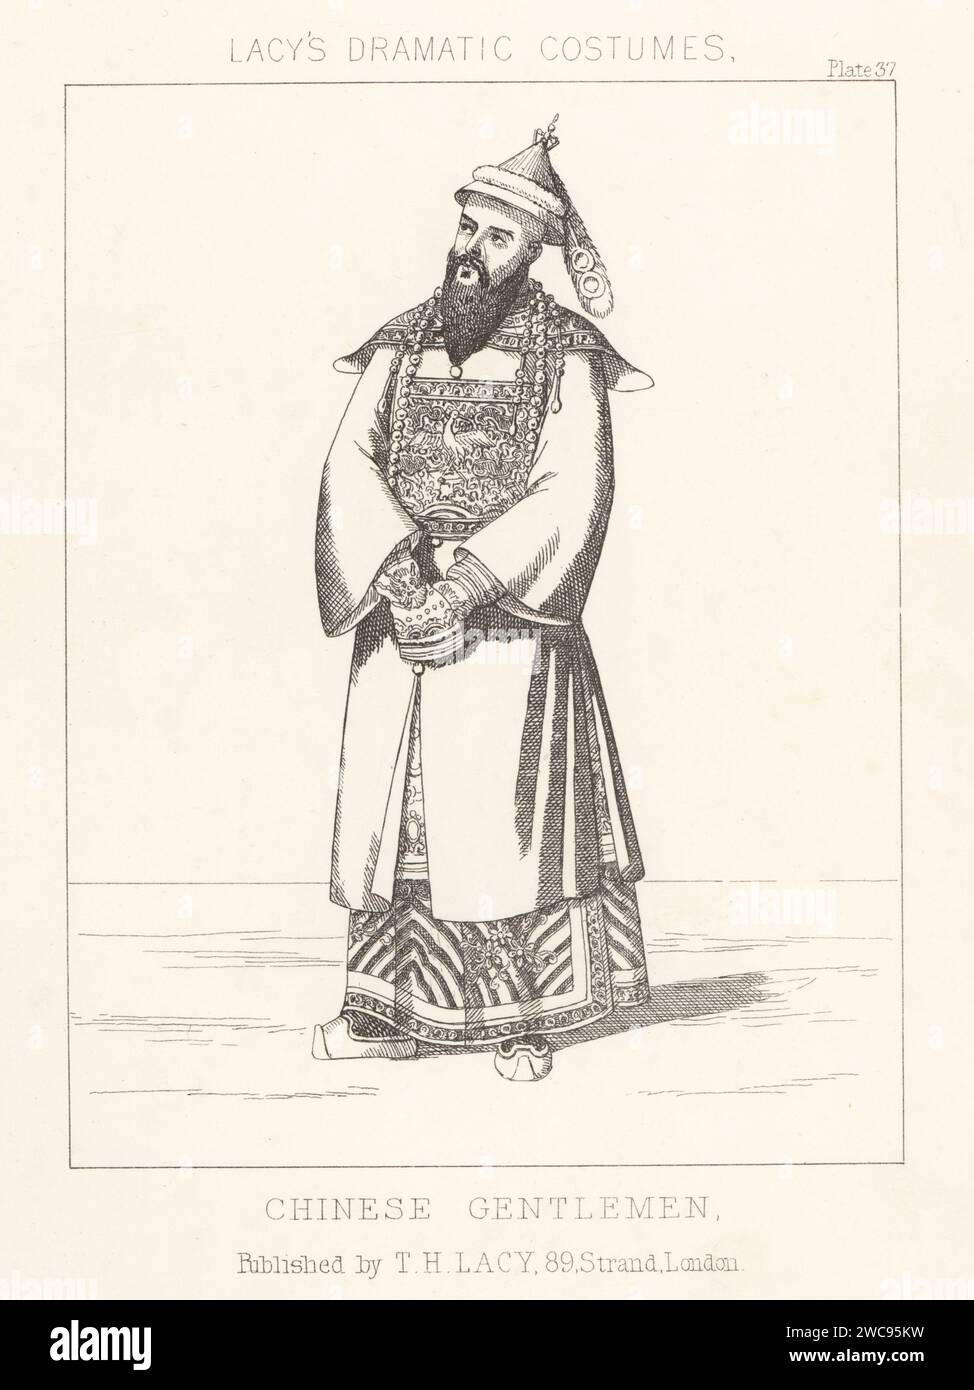 Mandarin, imperial court of China, 19th century. In plumed hat, silk tunic with embroidered square over robe, shoes. The bird shows his rank as a civil magistrate. Costume of a Chinese gentleman. Lithograph from Thomas Hailes Lacy's Male Costumes, Historical, National and Dramatic in 200 Plates, London, 1865. Lacy (1809-1873) was a British actor, playwright, theatrical manager and publisher. Stock Photo